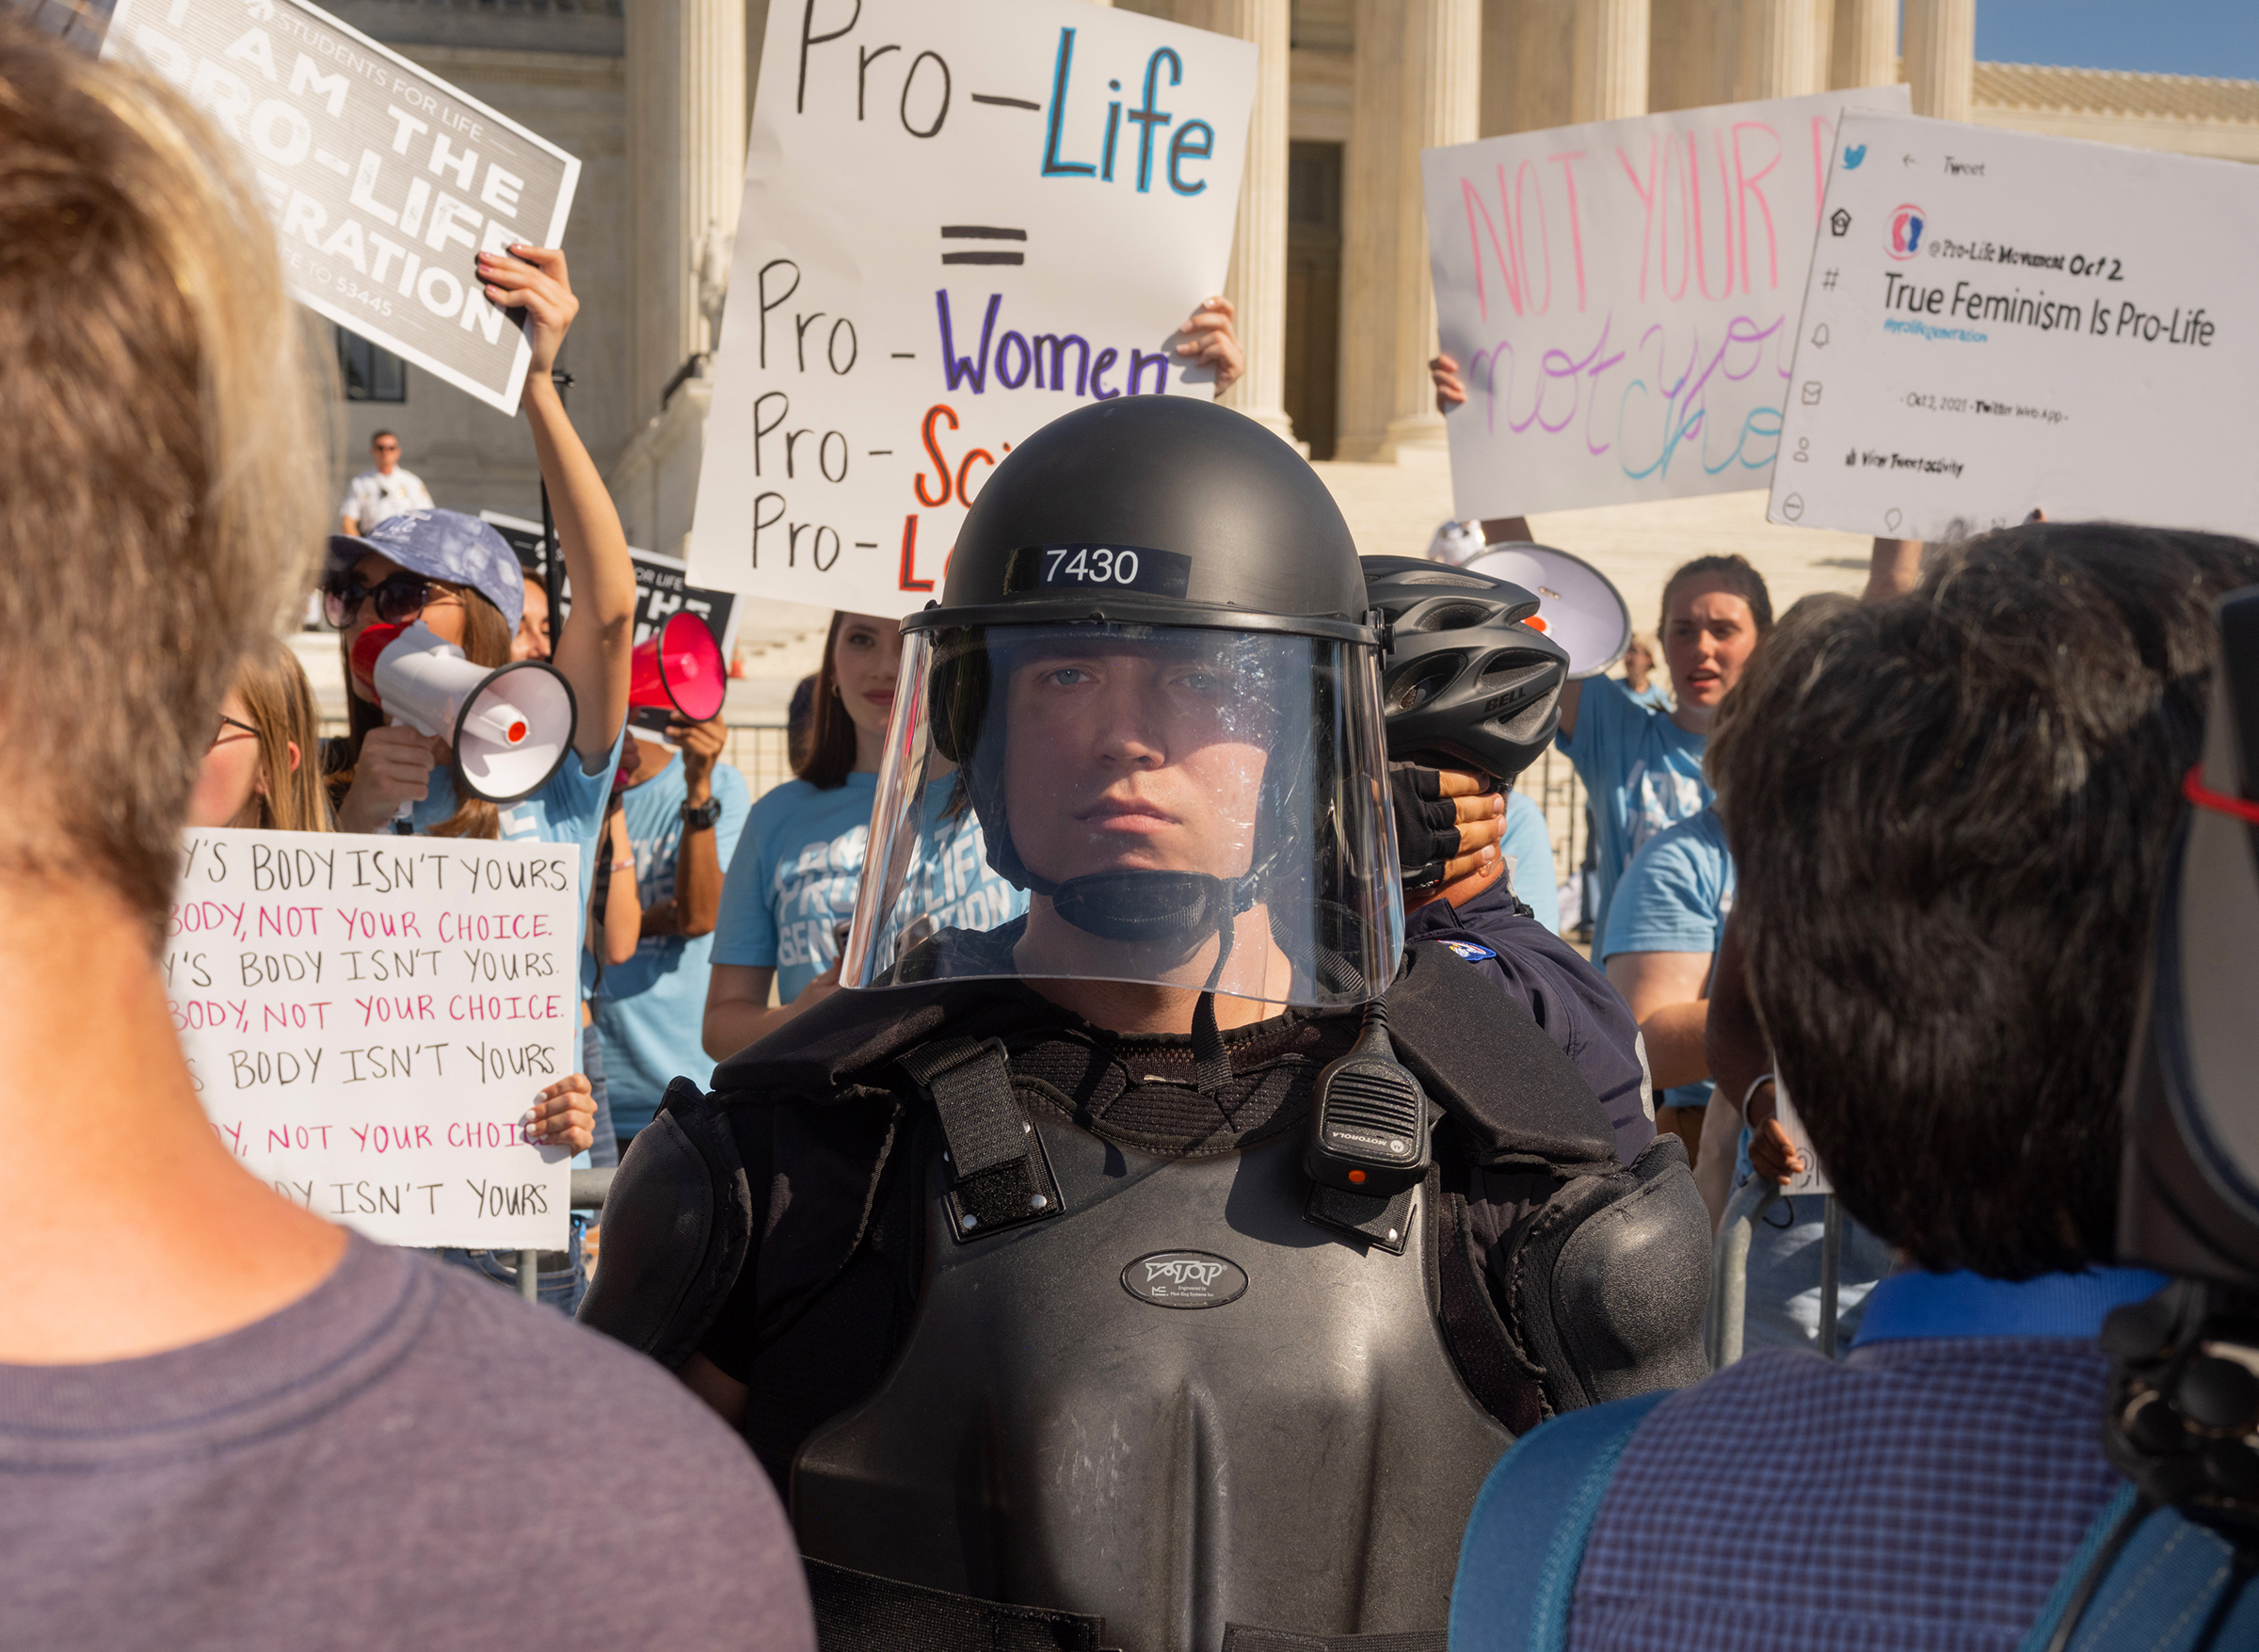 Protesters and counterprotesters meet outside of the Supreme Court at the Women's March and Rally for Abortion Justice in Washington, D.C., on Oct. 2. With counterprotesters situated closer to the building, a security officer stands in between the groups. (Elizabeth Bick for TIME)